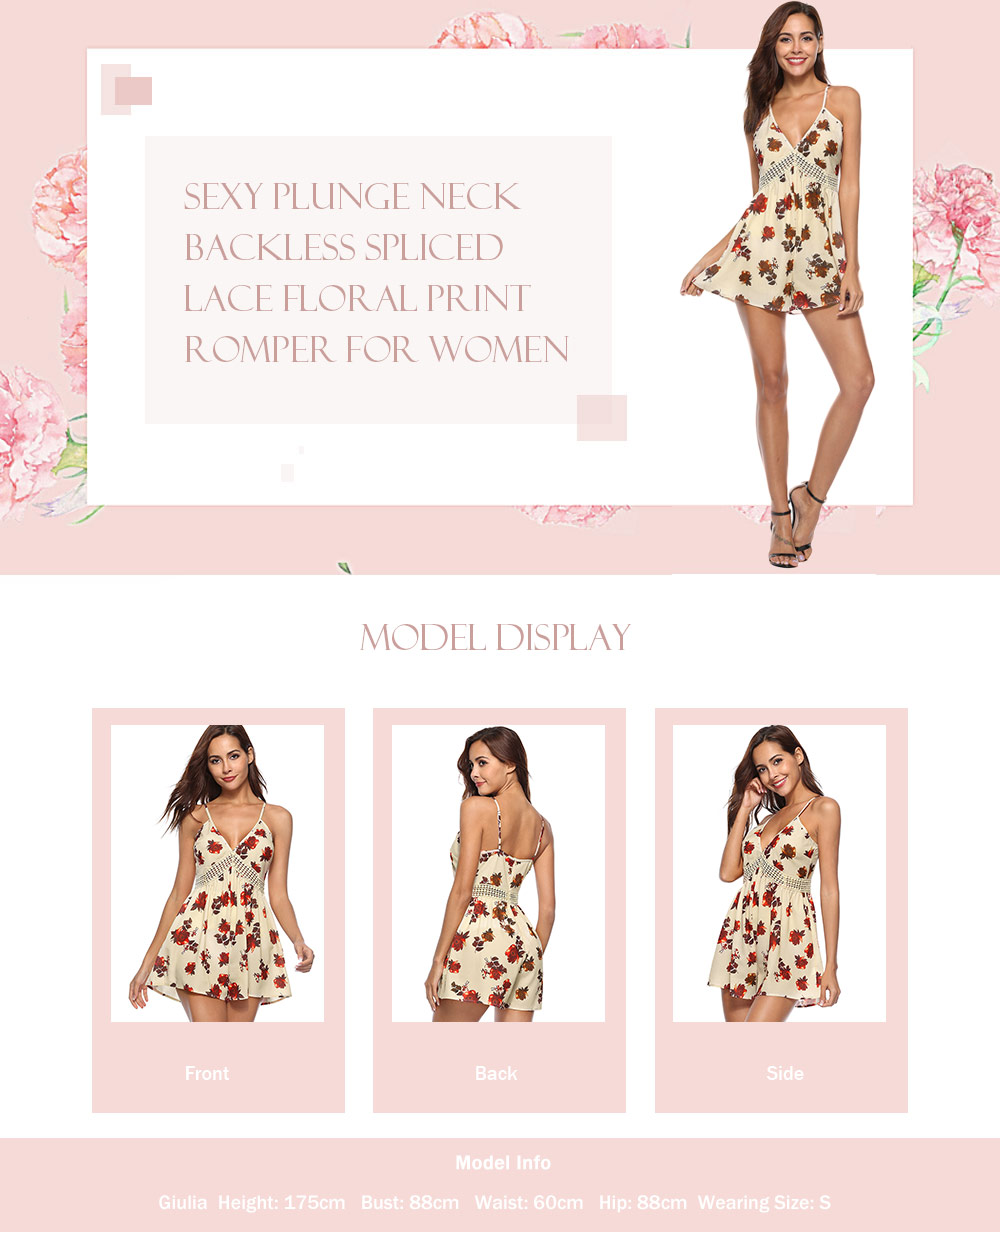 Sexy Plunge Neck Spaghetti Strap Backless Spliced Lace Floral Print Playsuit Women Romper